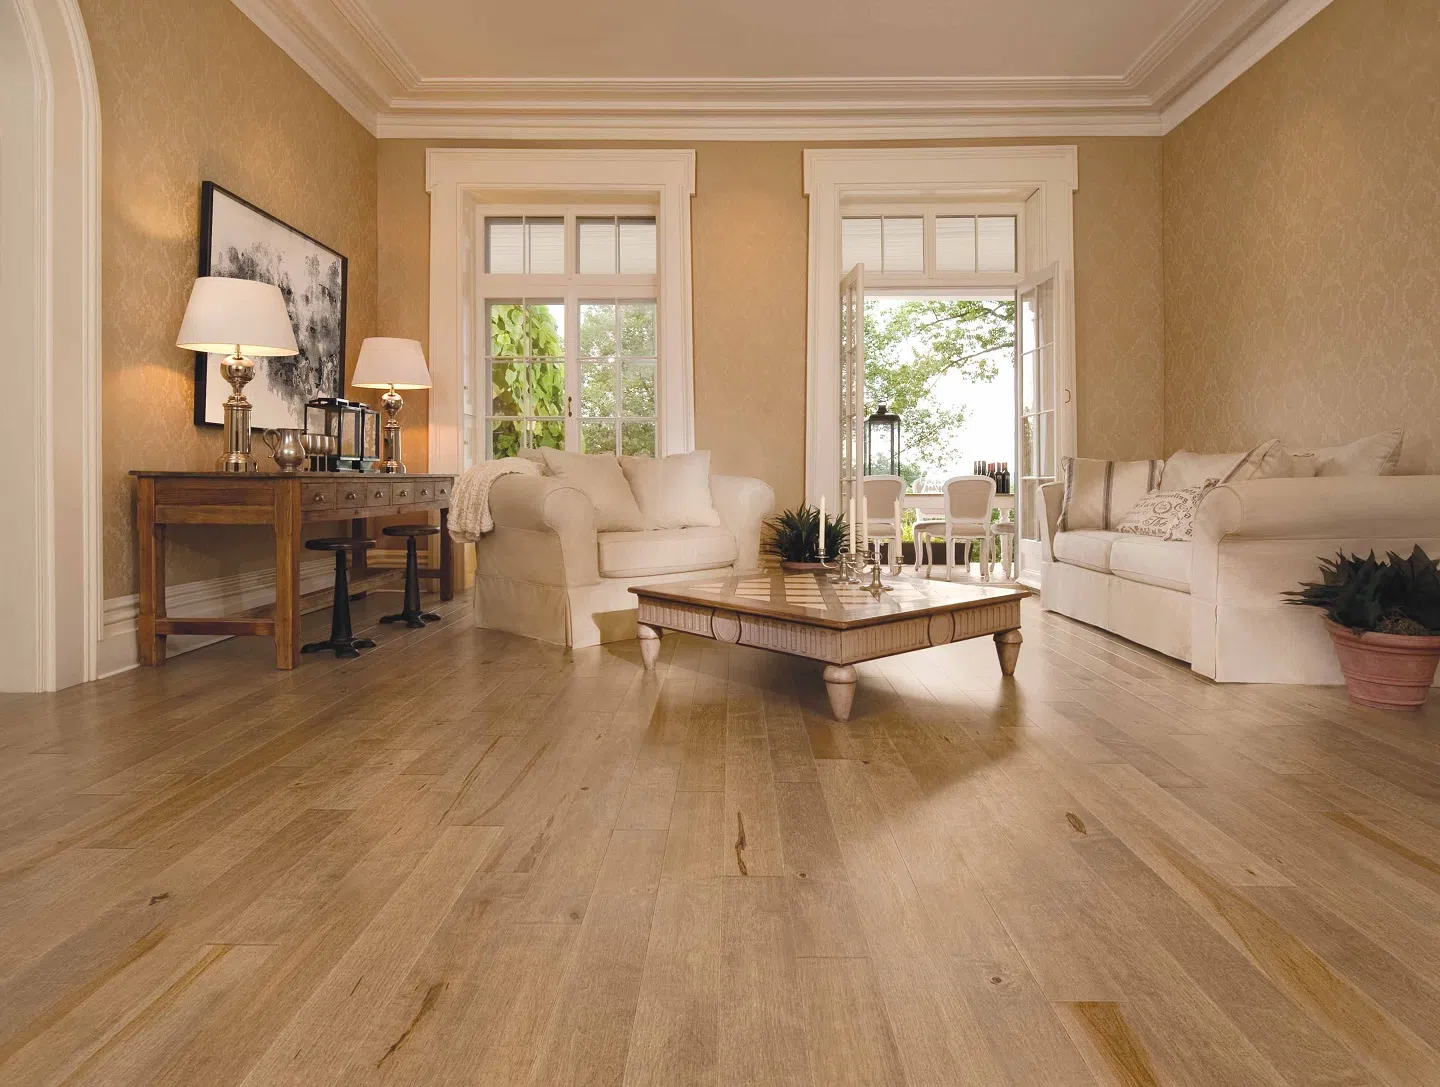 Maple Flooring: Pros, Cons, Costs, and Durability